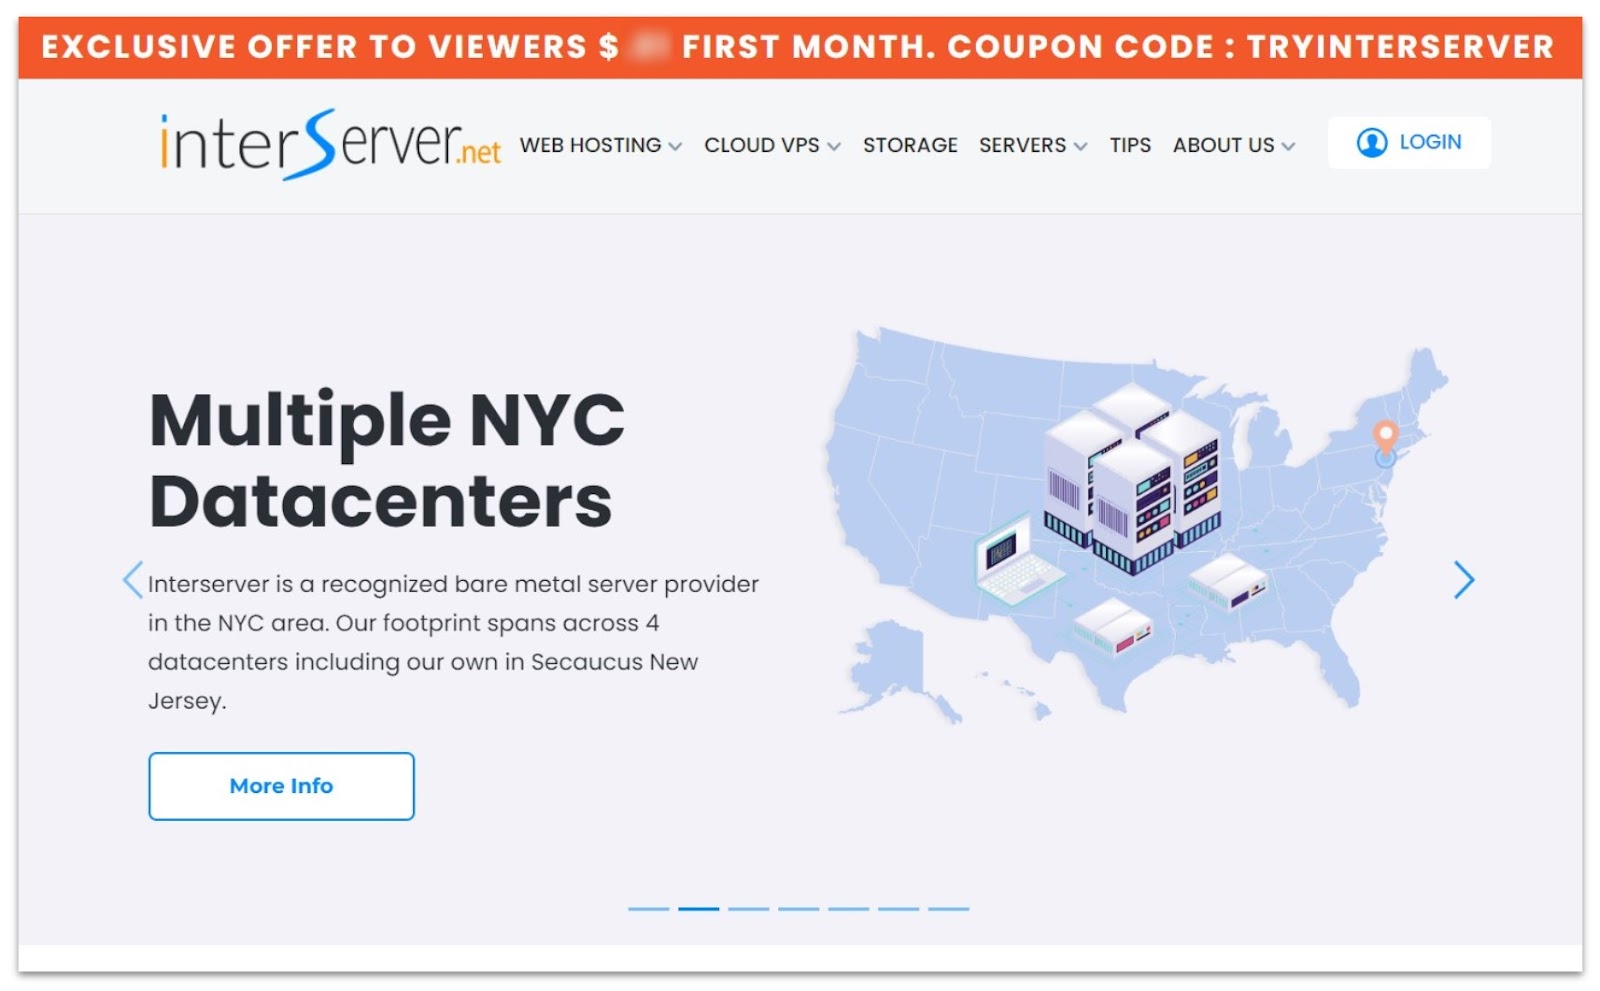 InterServer NY data centers landing page